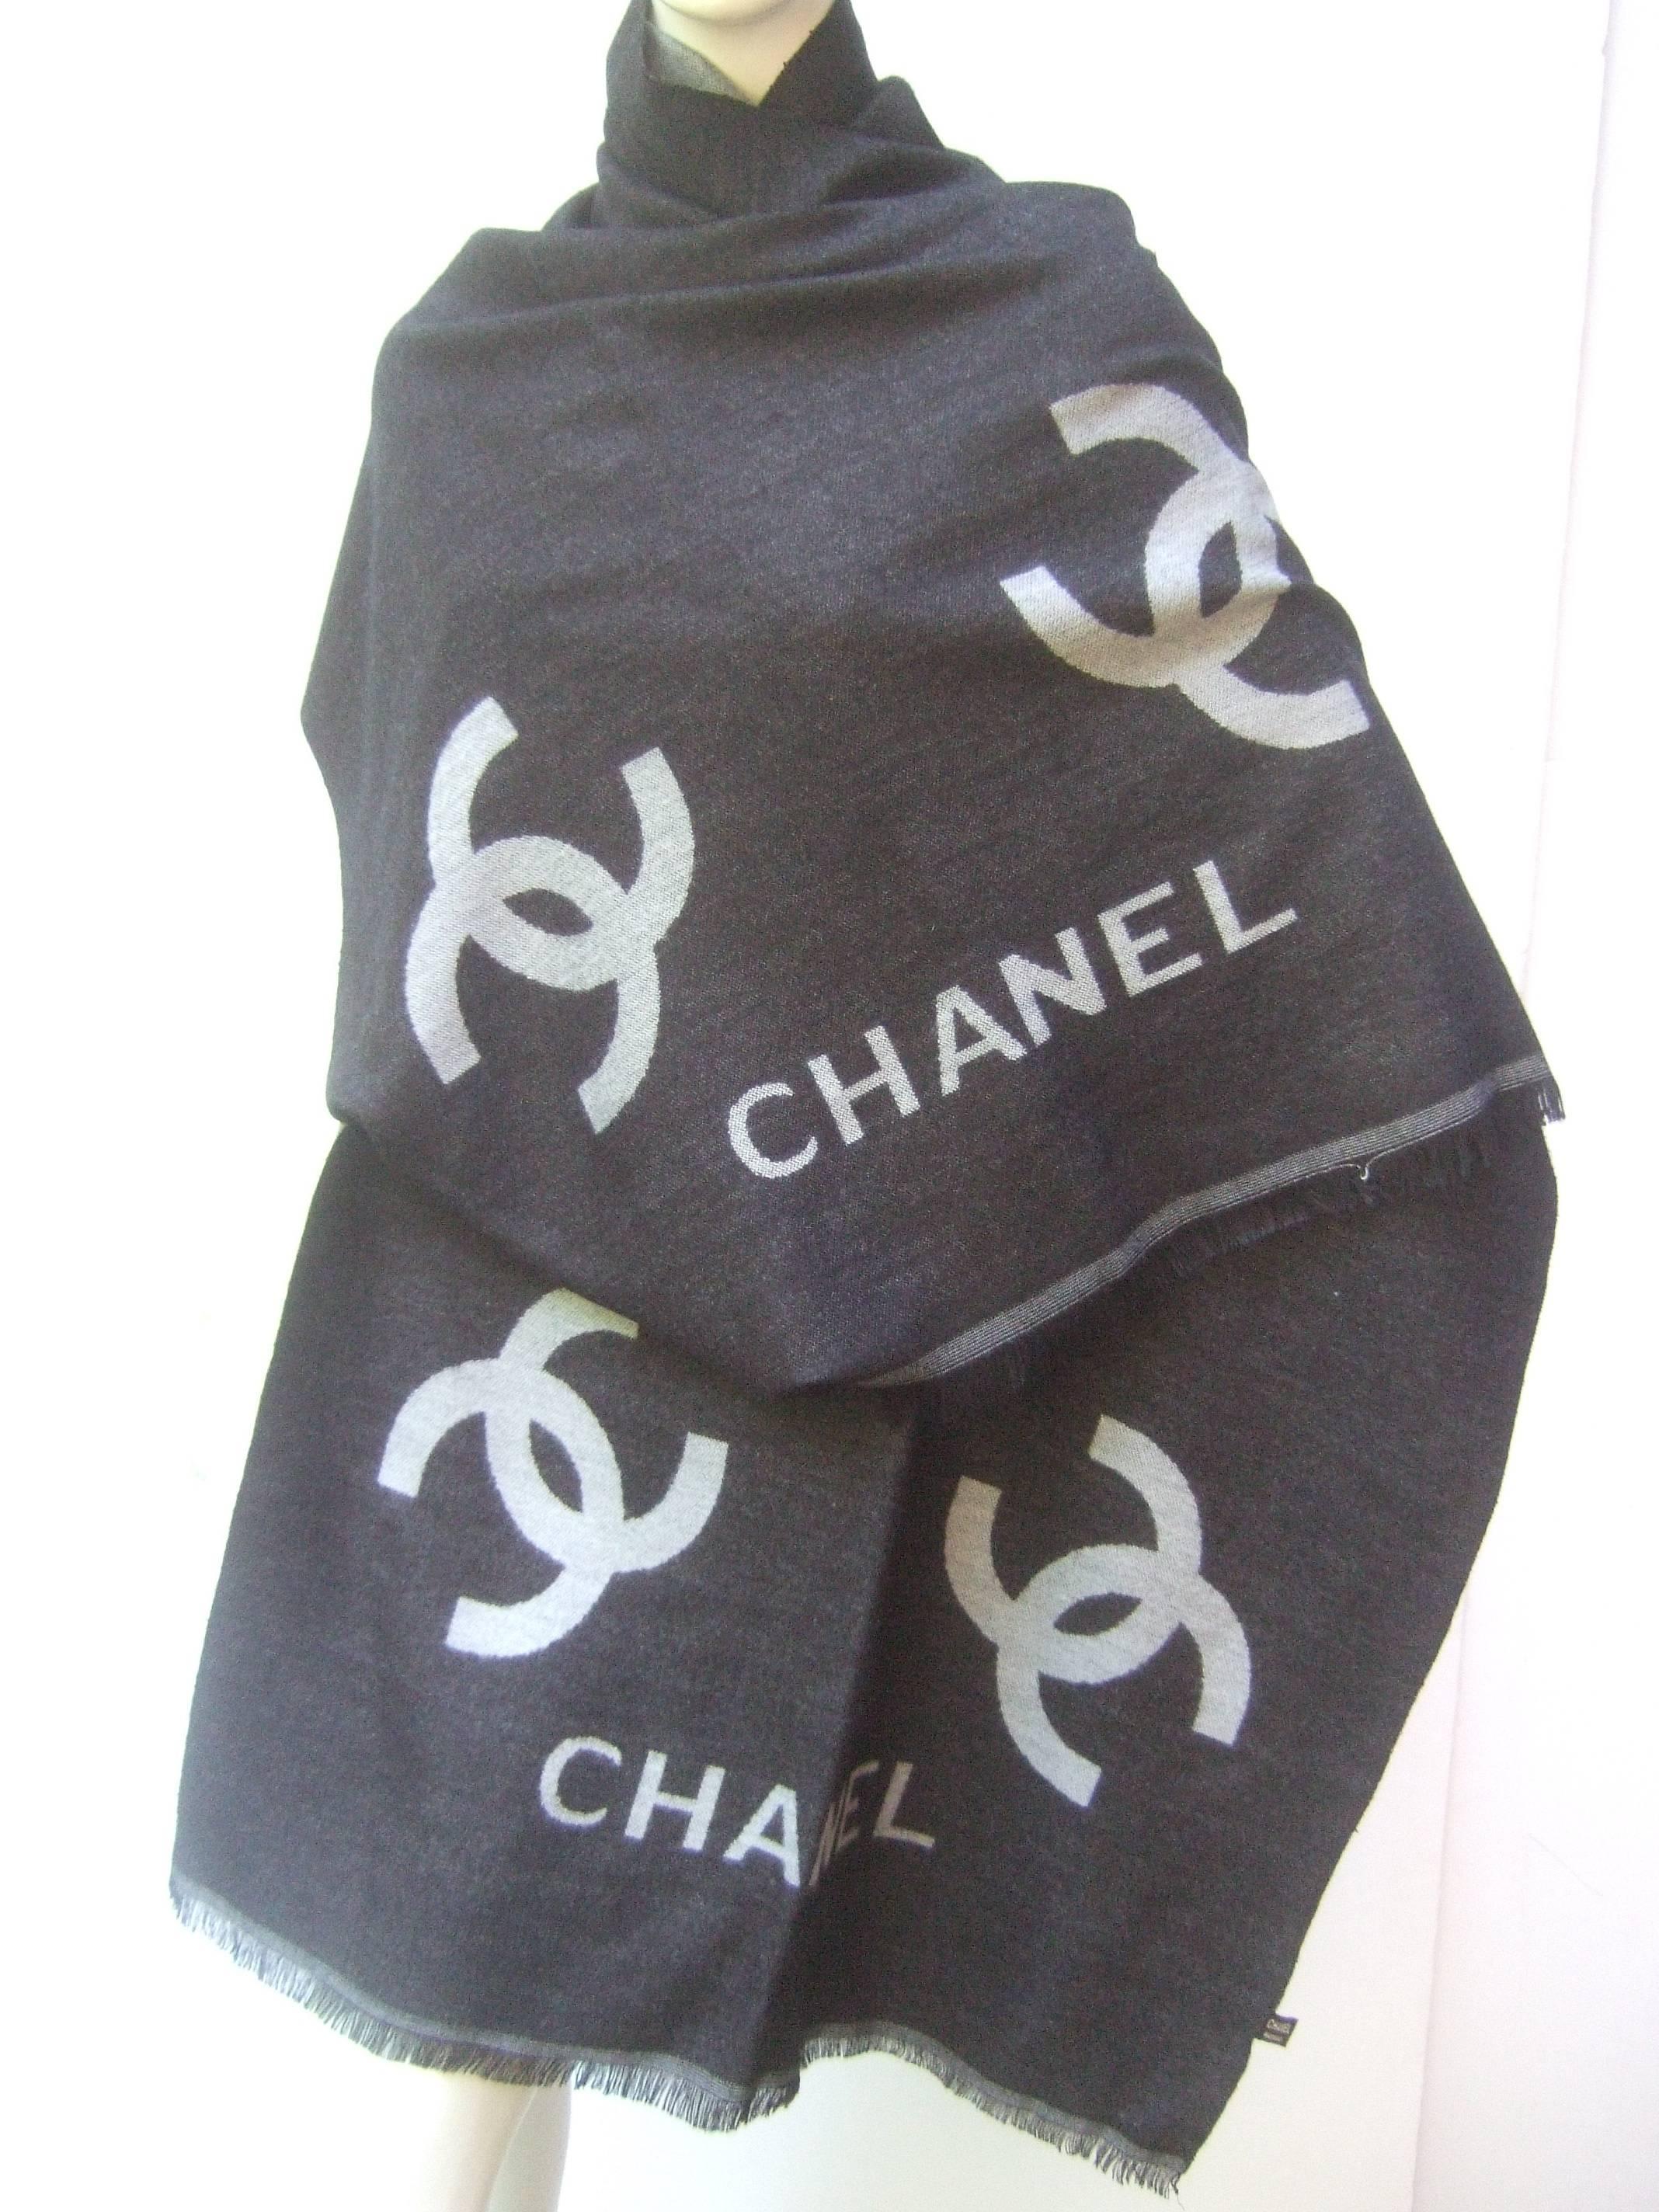 Chanel Charcoal gray silk wool blend shawl 
The stylish shawl is designed with a charcoal gray
background; contrasted with Chanel's C.C. iconic 
initials and the namesake Chanel name

The luxurious light weight silk and wool blend shawl
is